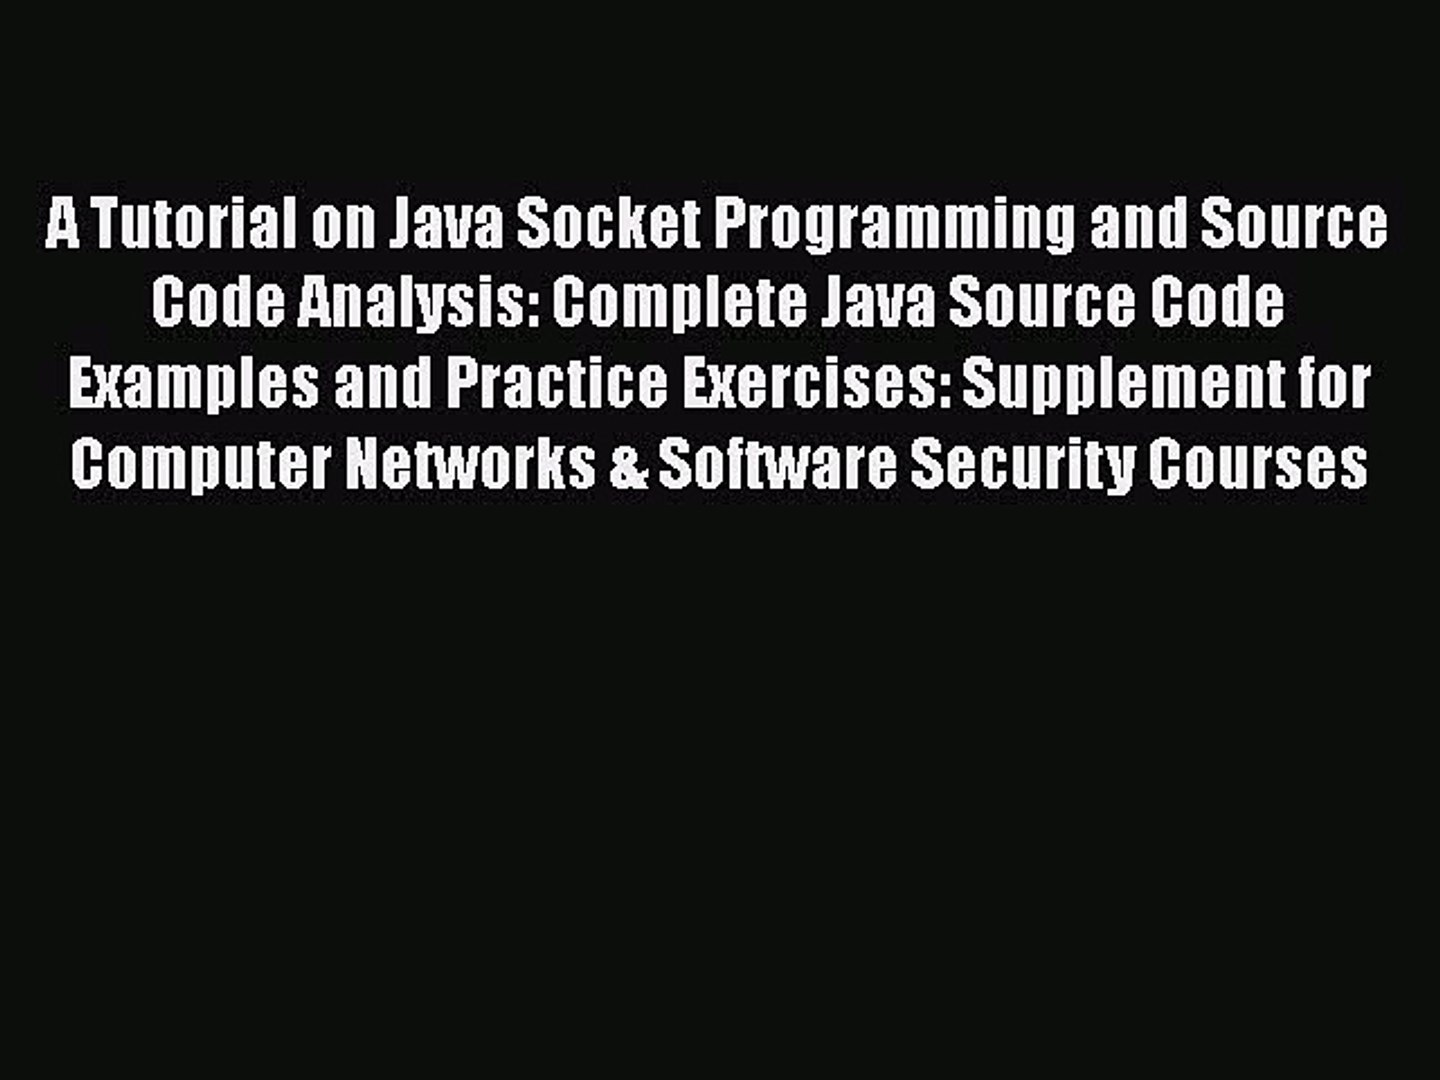 Read A Tutorial on Java Socket Programming and Source Code Analysis: Complete Java Source Code